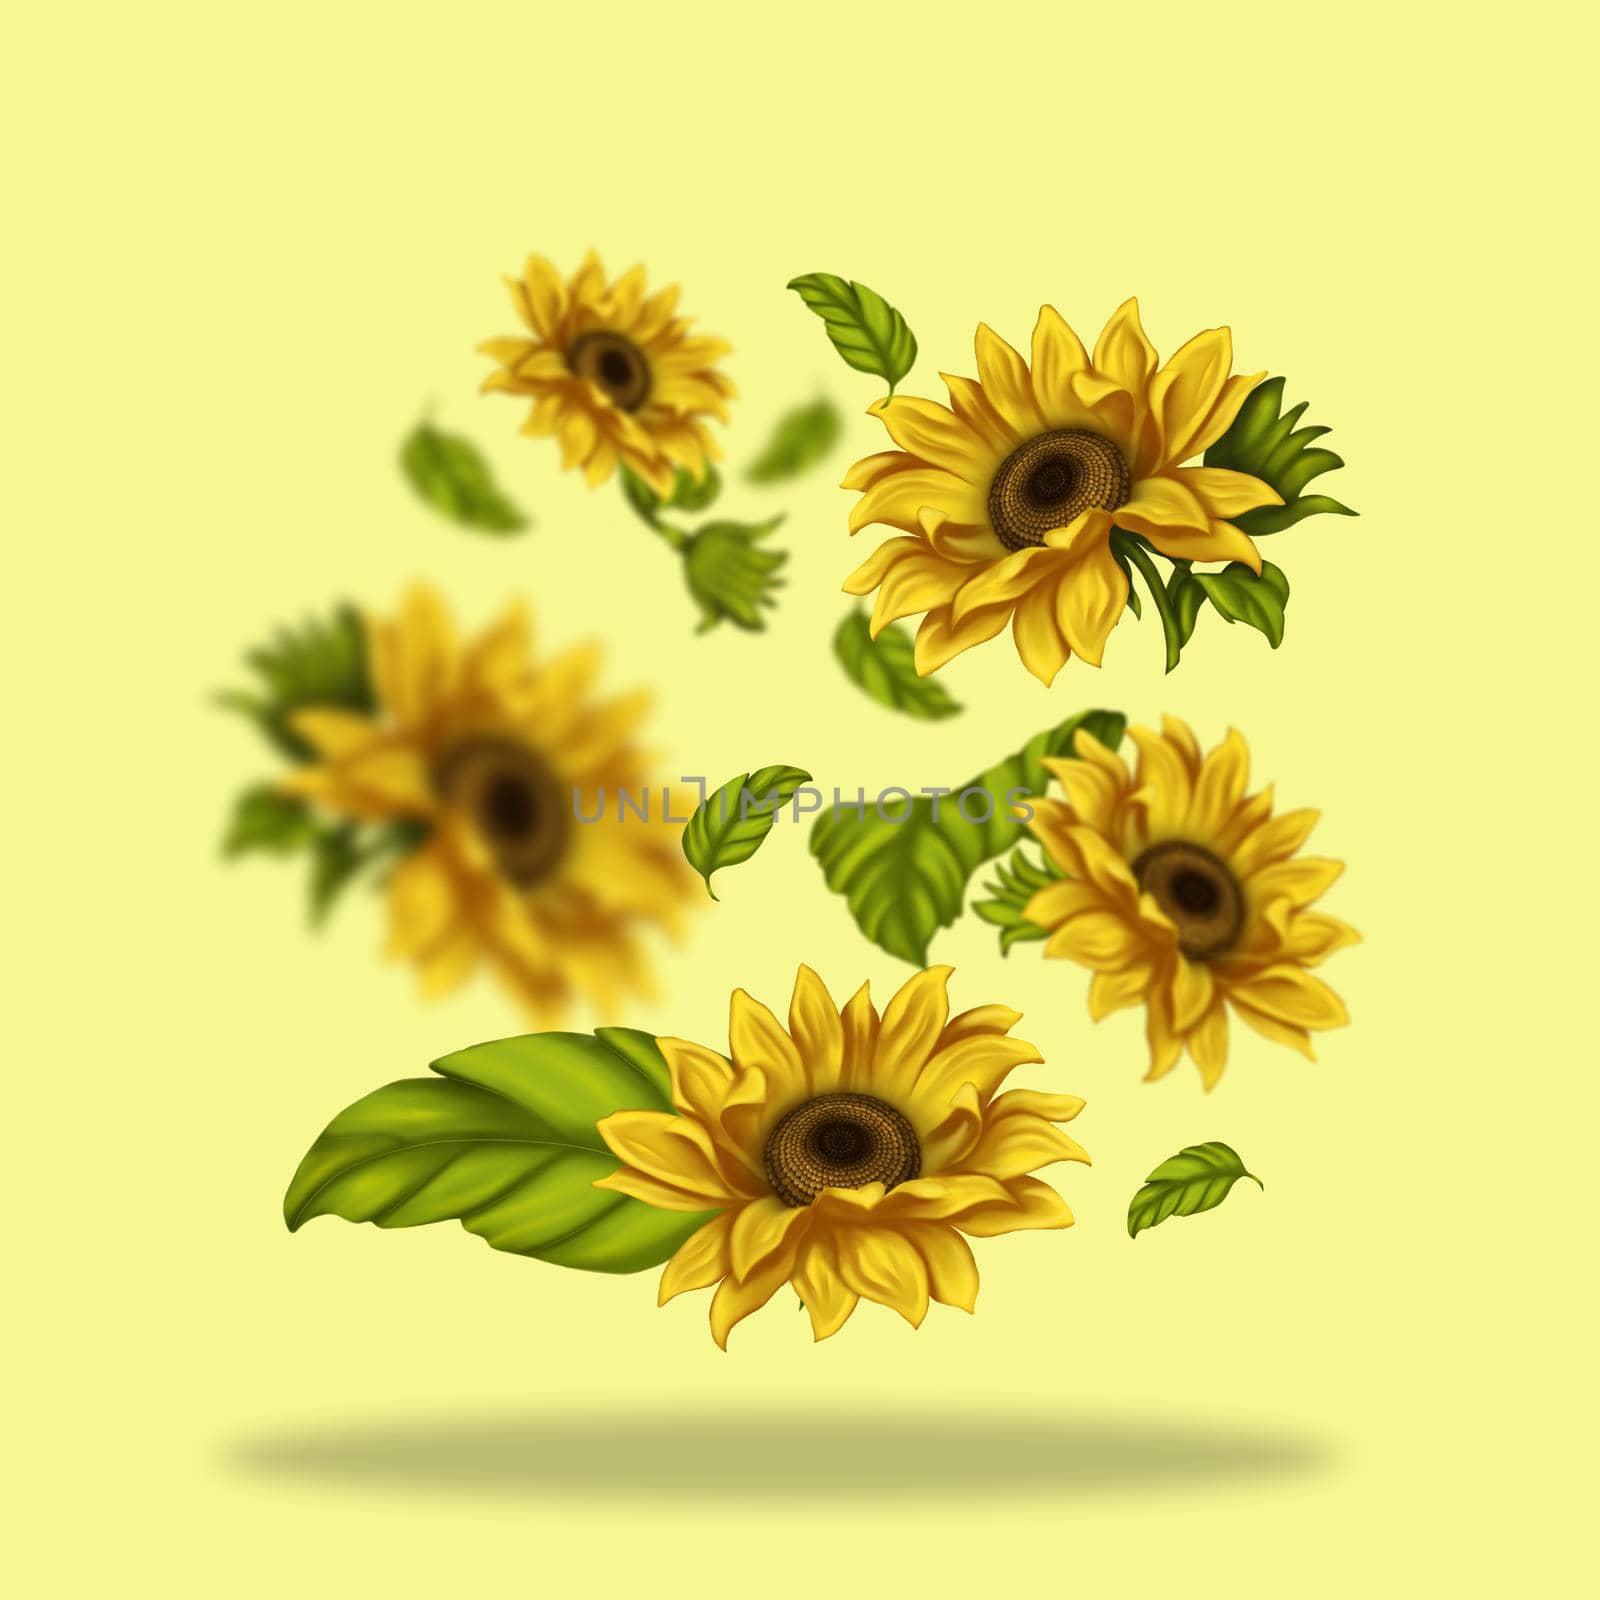 Illustration of sunflower flowers. Flowers freely levitate in space. Bright flowers on a light background. Summer, sunflowers.